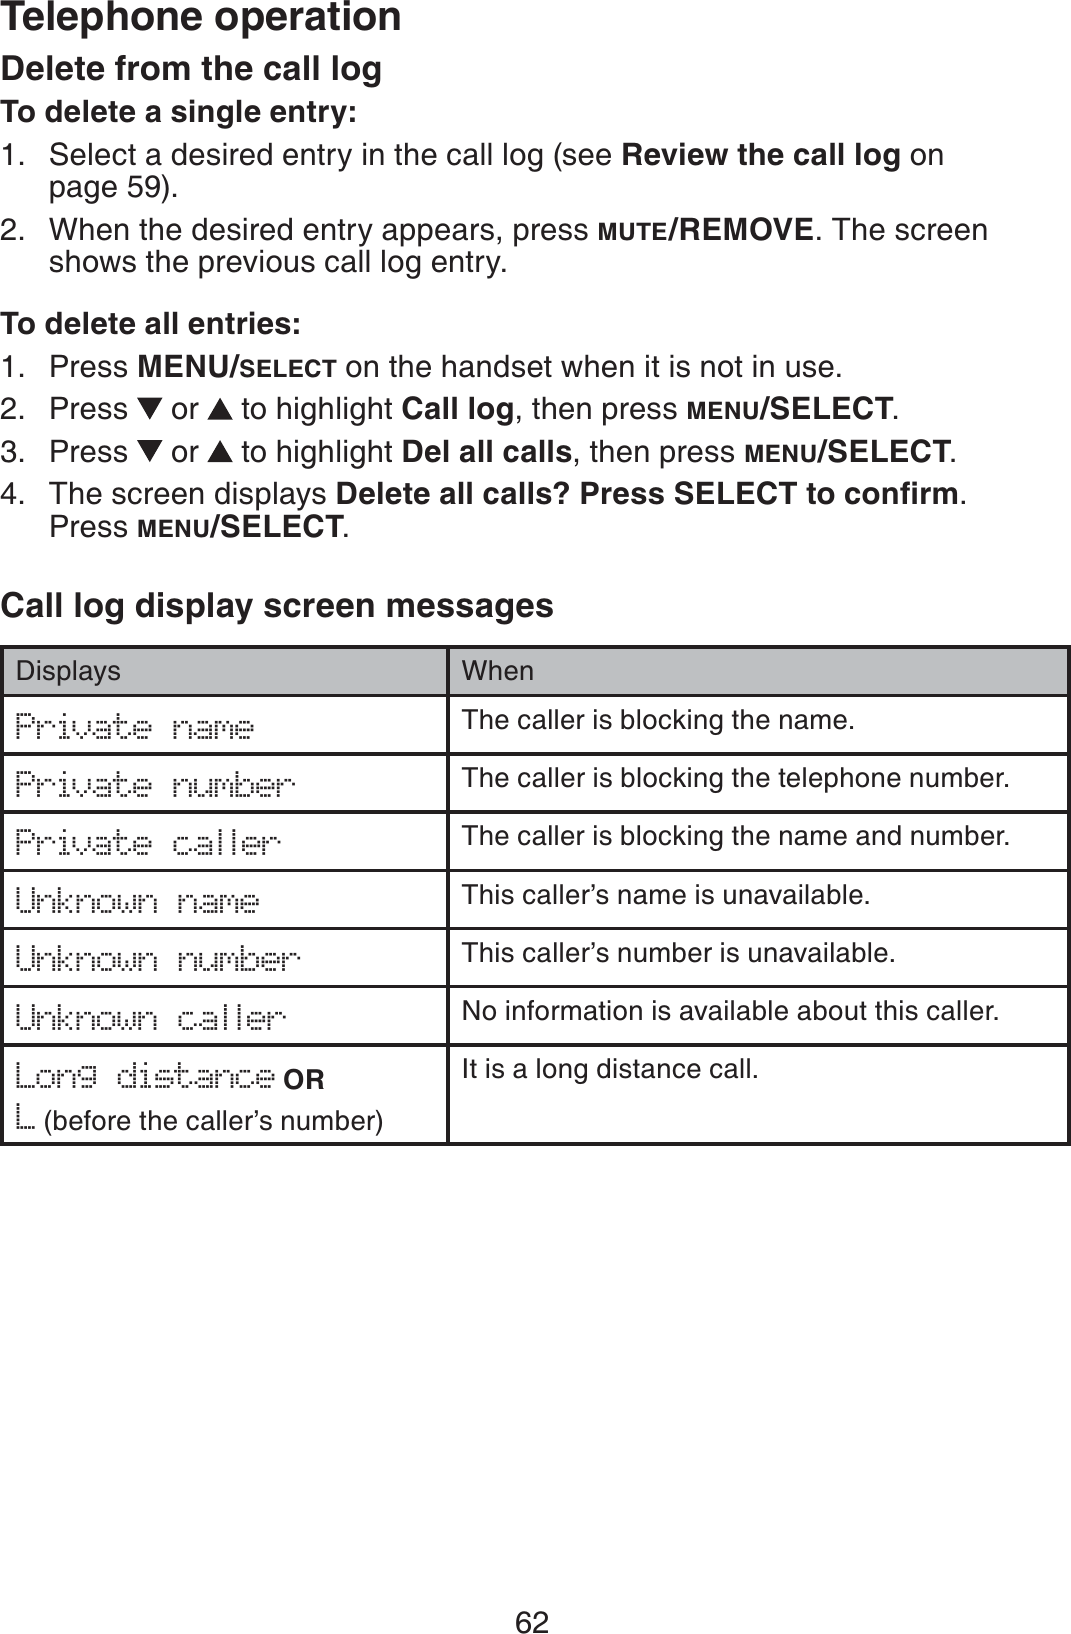 62Telephone operationDelete from the call logTo delete a single entry:Select a desired entry in the call log (see Review the call log on page 59).When the desired entry appears, press MUTE/REMOVE. The screen shows the previous call log entry.To delete all entries:Press MENU/SELECT on the handset when it is not in use.Press  or  to highlight Call log, then press MENU/SELECT.Press  or  to highlight Del all calls, then press MENU/SELECT.The screen displays &amp;GNGVGCNNECNNU!2TGUU5&apos;.&apos;%6VQEQPſTO.Press MENU/SELECT.Call log display screen messages1.2.1.2.3.4.Displays WhenPrivate name The caller is blocking the name.Private number The caller is blocking the telephone number.Private caller The caller is blocking the name and number. Unknown name  This caller’s name is unavailable. Unknown number   This caller’s number is unavailable.Unknown caller No information is available about this caller.Long distance ORL (before the caller’s number) It is a long distance call.